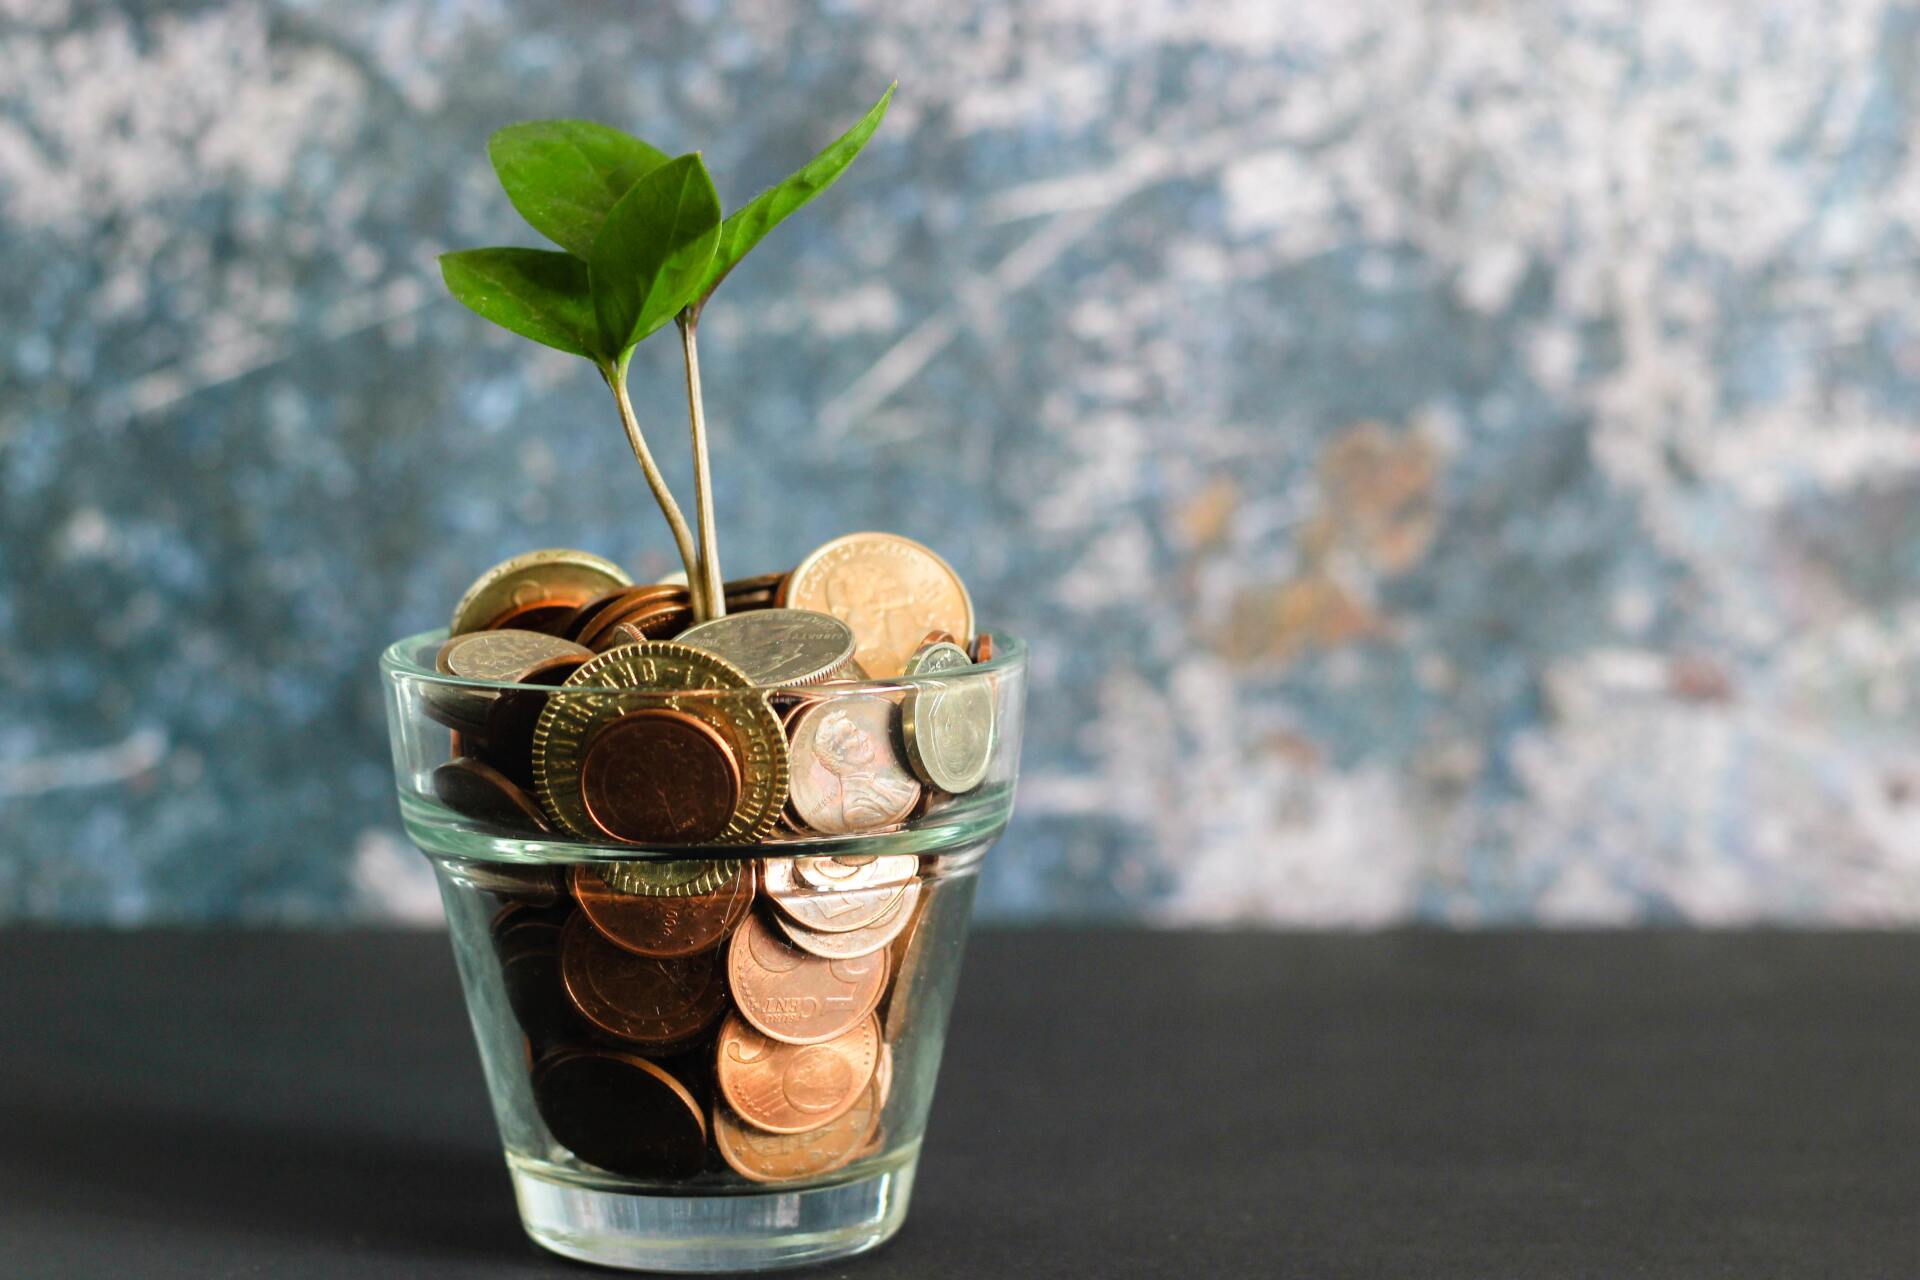 A small plant grows out of a pot filled with saved money